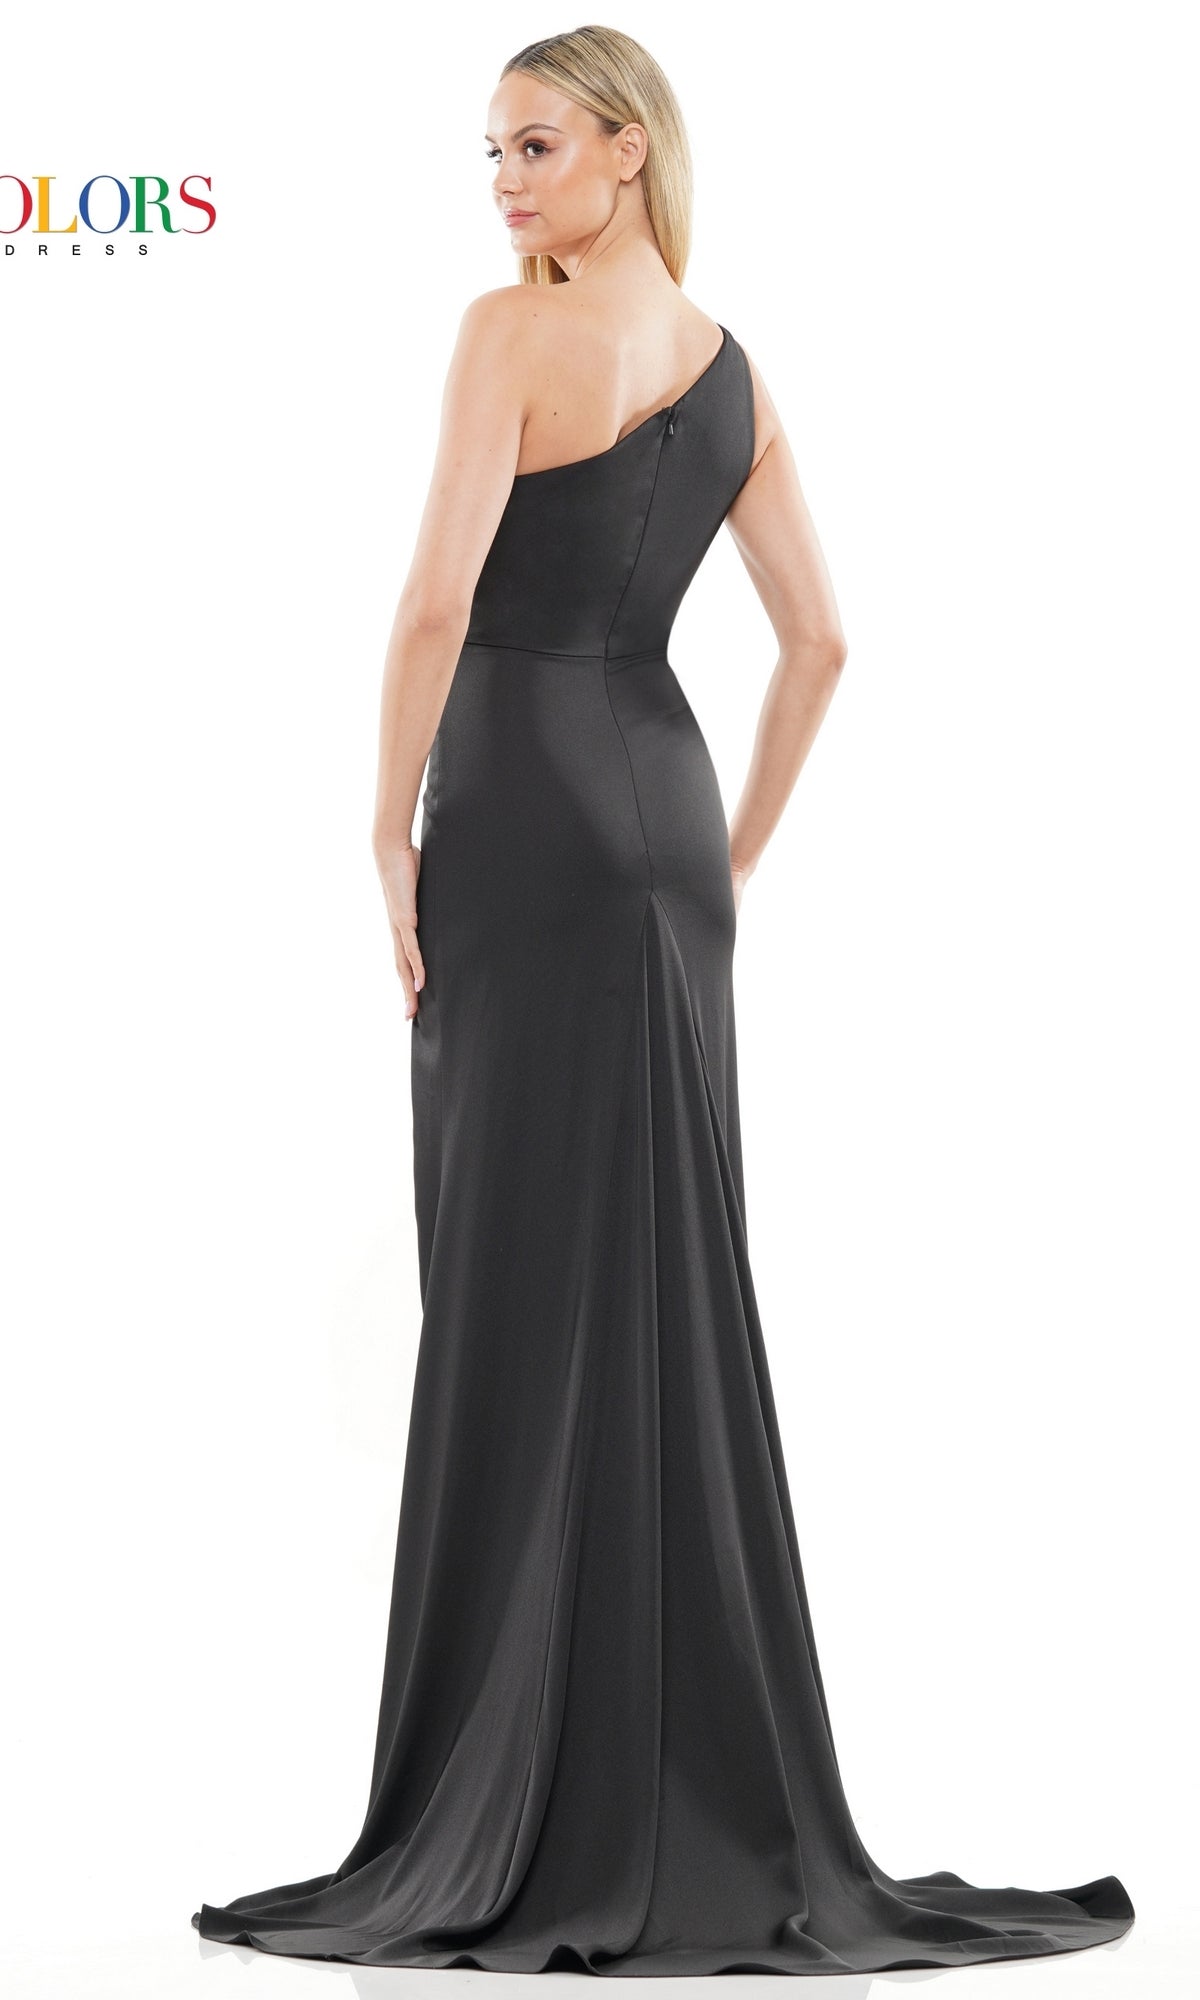 One-Shoulder Stretch Faille Long Prom Dress 3090